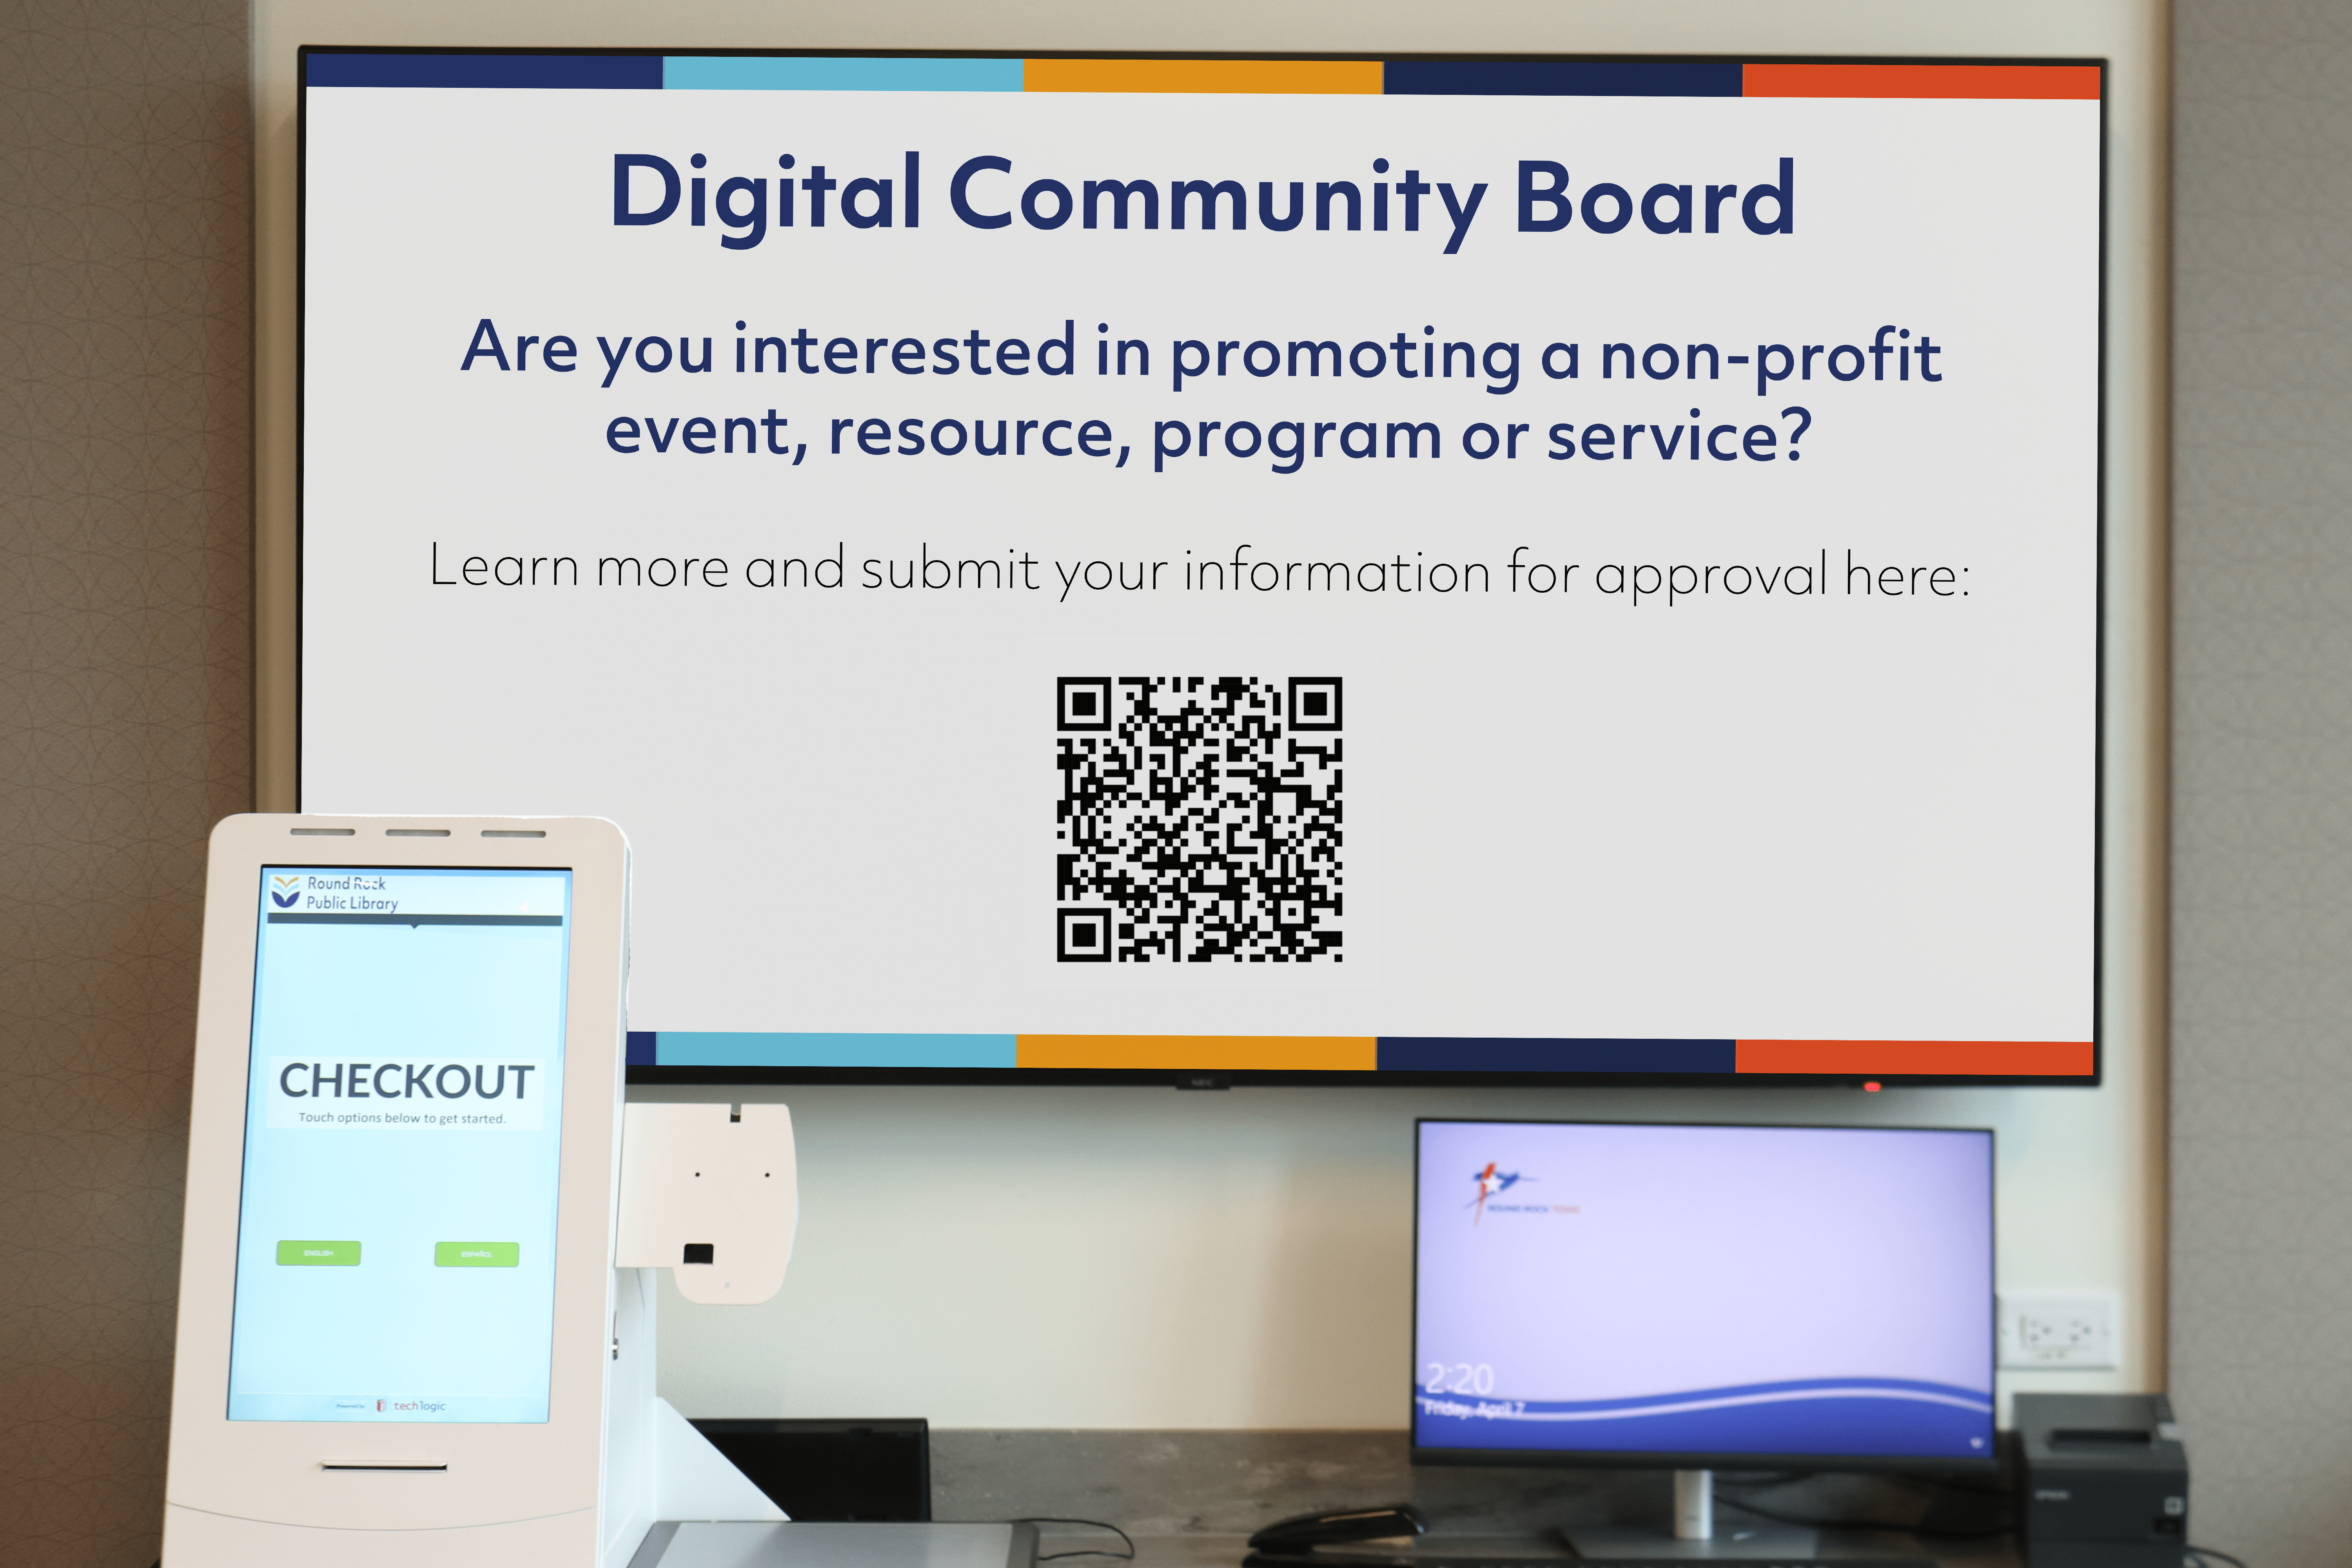 The digital community boards are used to promote non-profit educational, cultural and recreational events, activities, meetings, etc. Posting information on the community boards is one of the vital forms of communication in our library. For more information, please visit our website at https://www.roundrocktexas.gov/city-departments/library-home/how-do-i/digital-community-boards/.